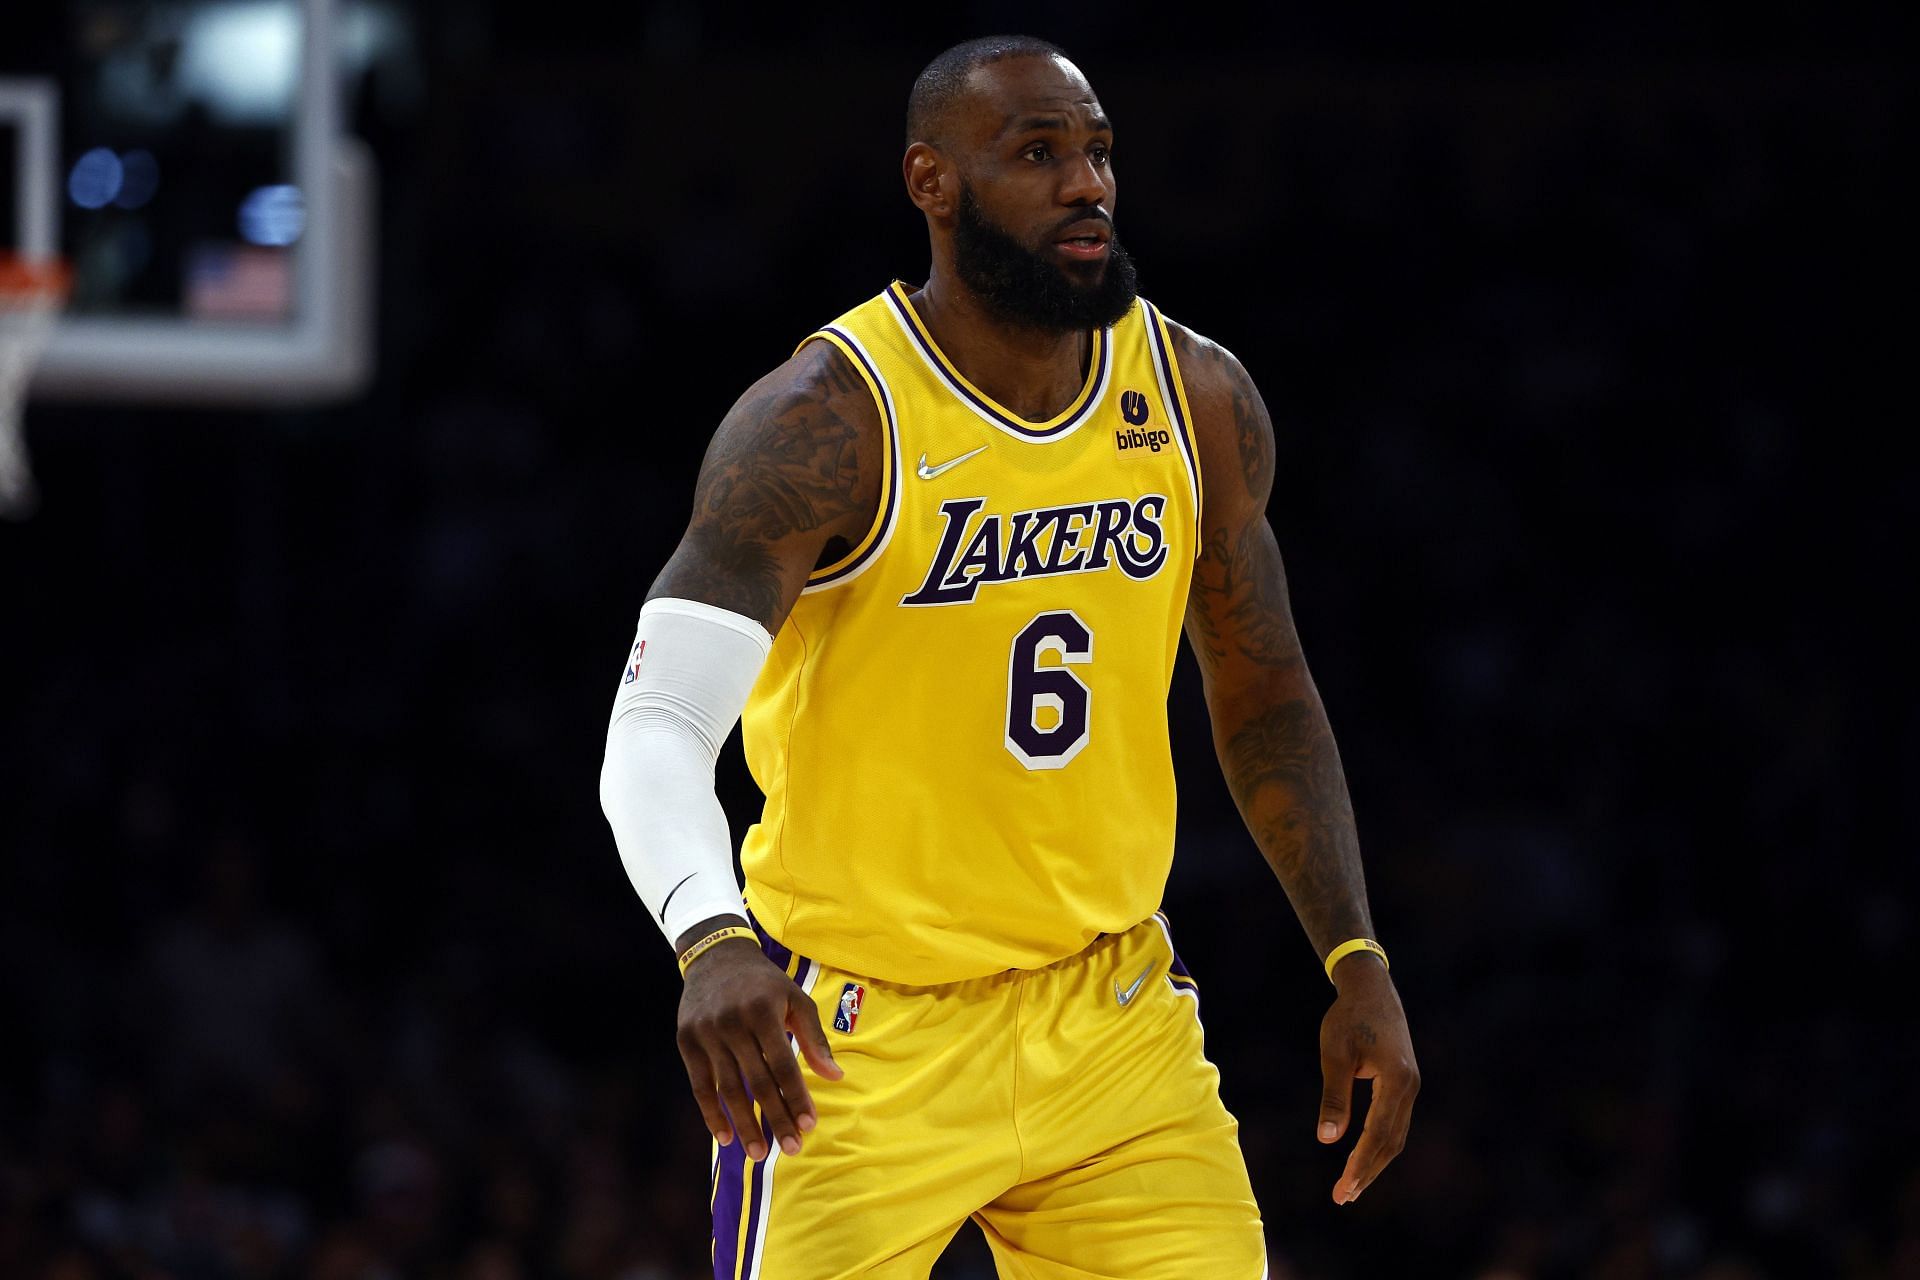 LeBron James had 19 points and five turnovers as the LA Lakers lost to the Minnesota Timberwolves